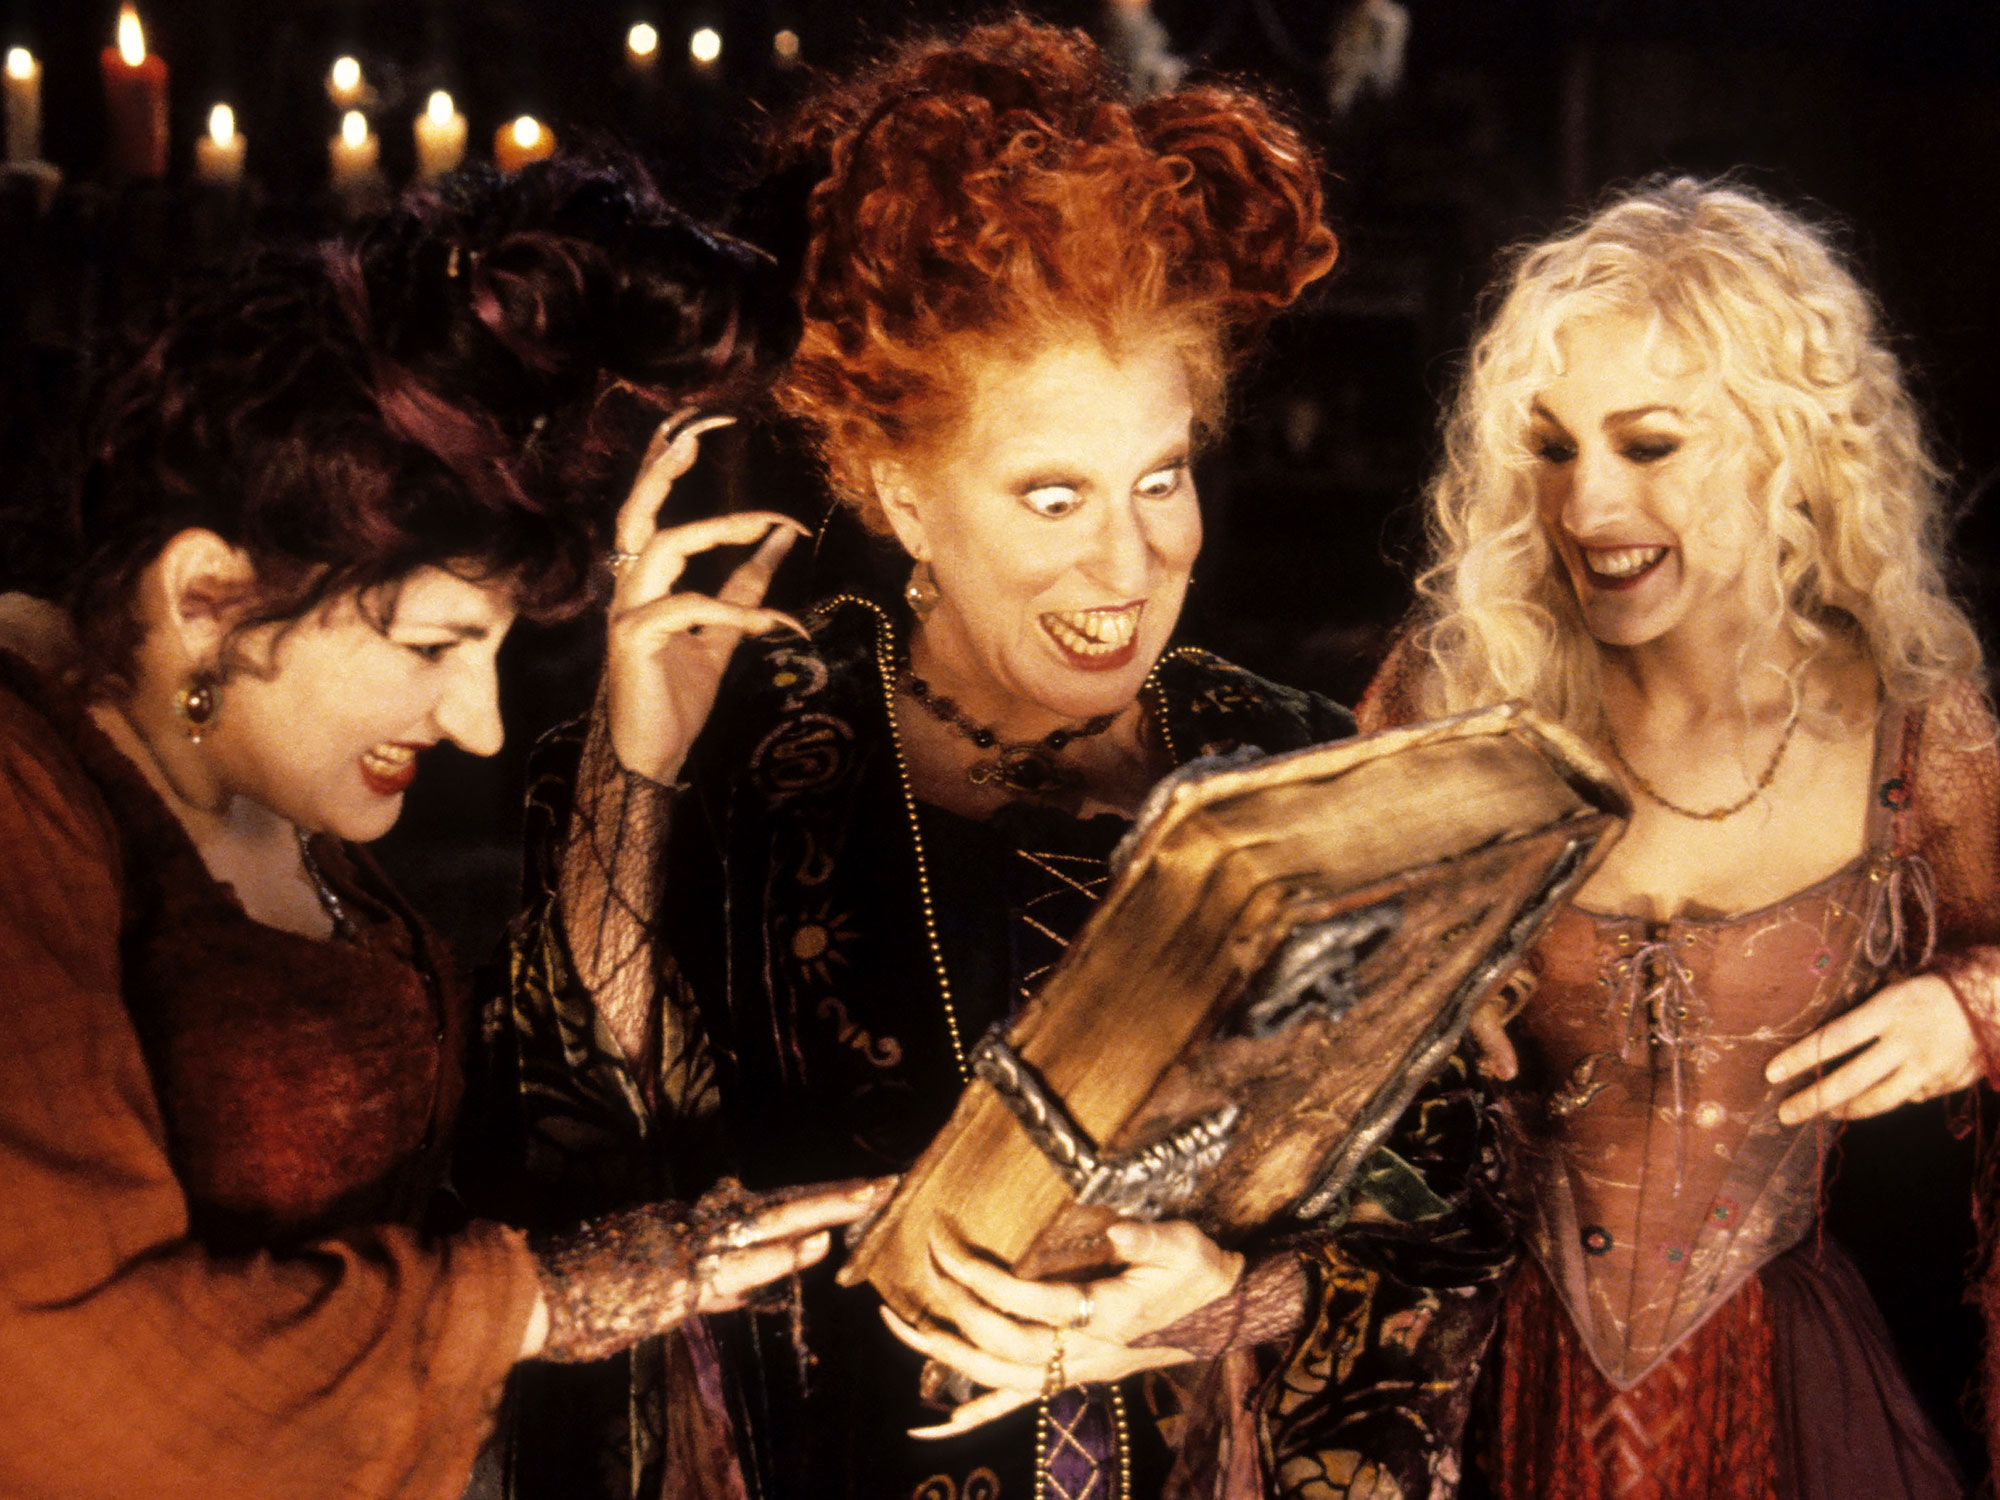 Max From 'Hocus Pocus' Is All Grown Up Now